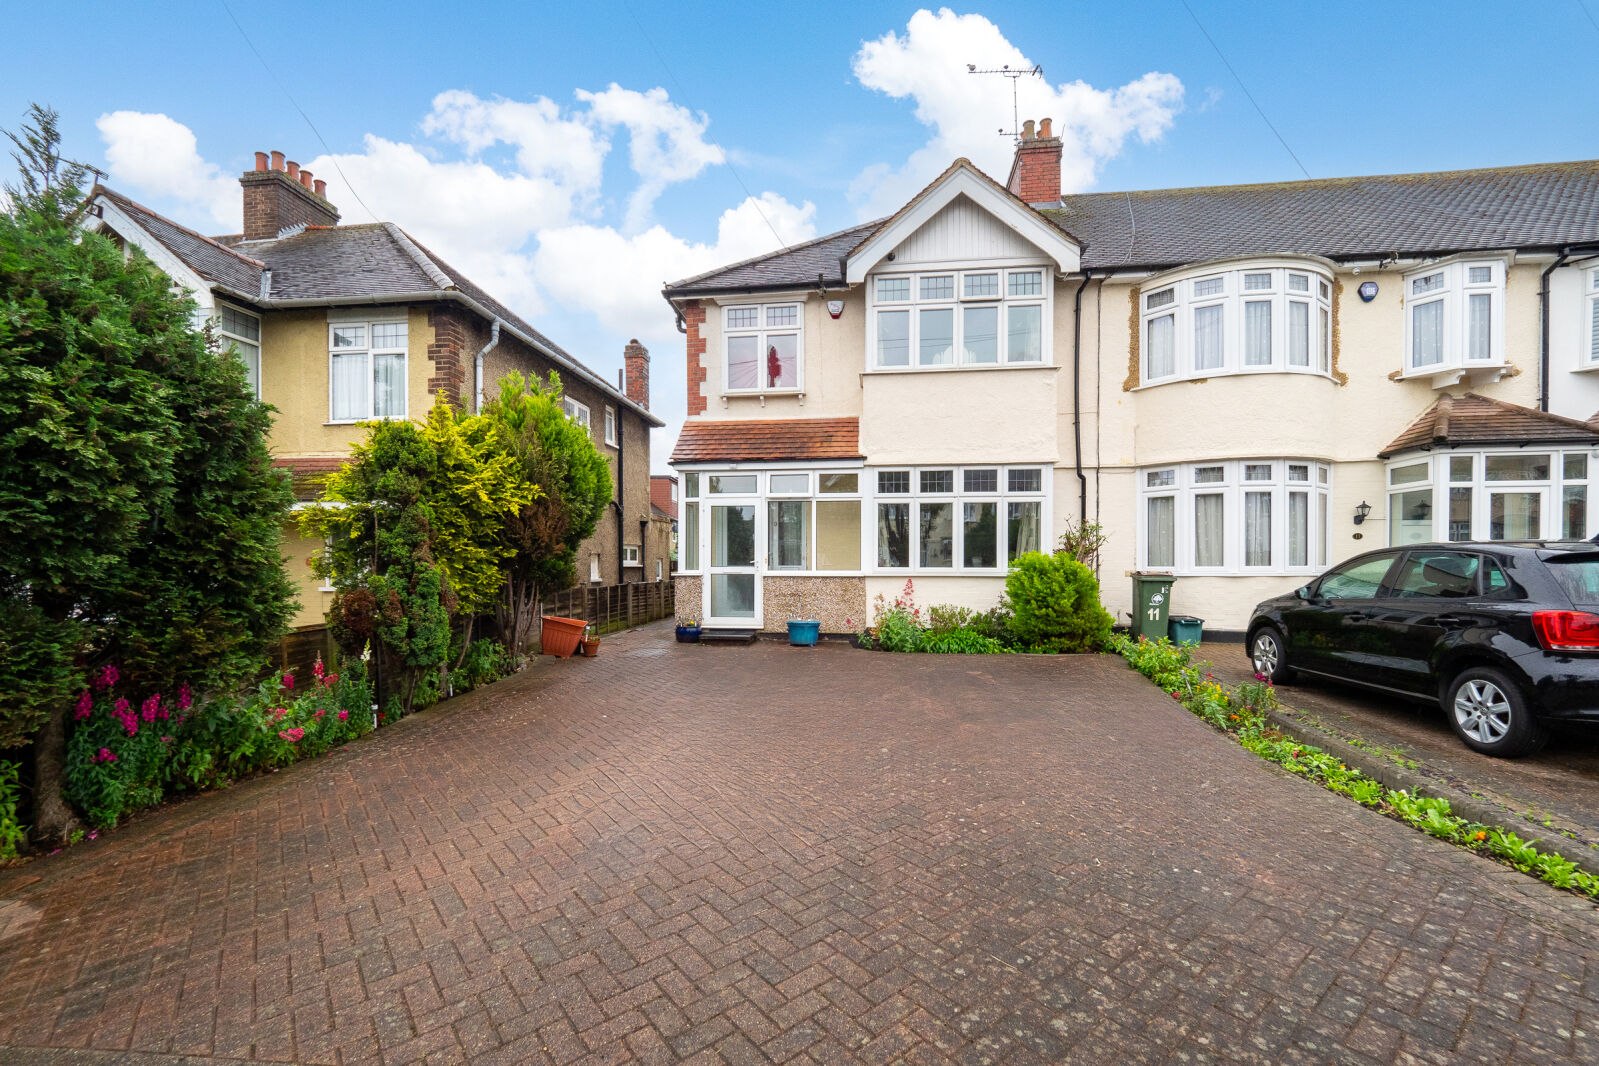 3 bedroom semi detached house for sale Kenley Walk, Cheam, SM3, main image